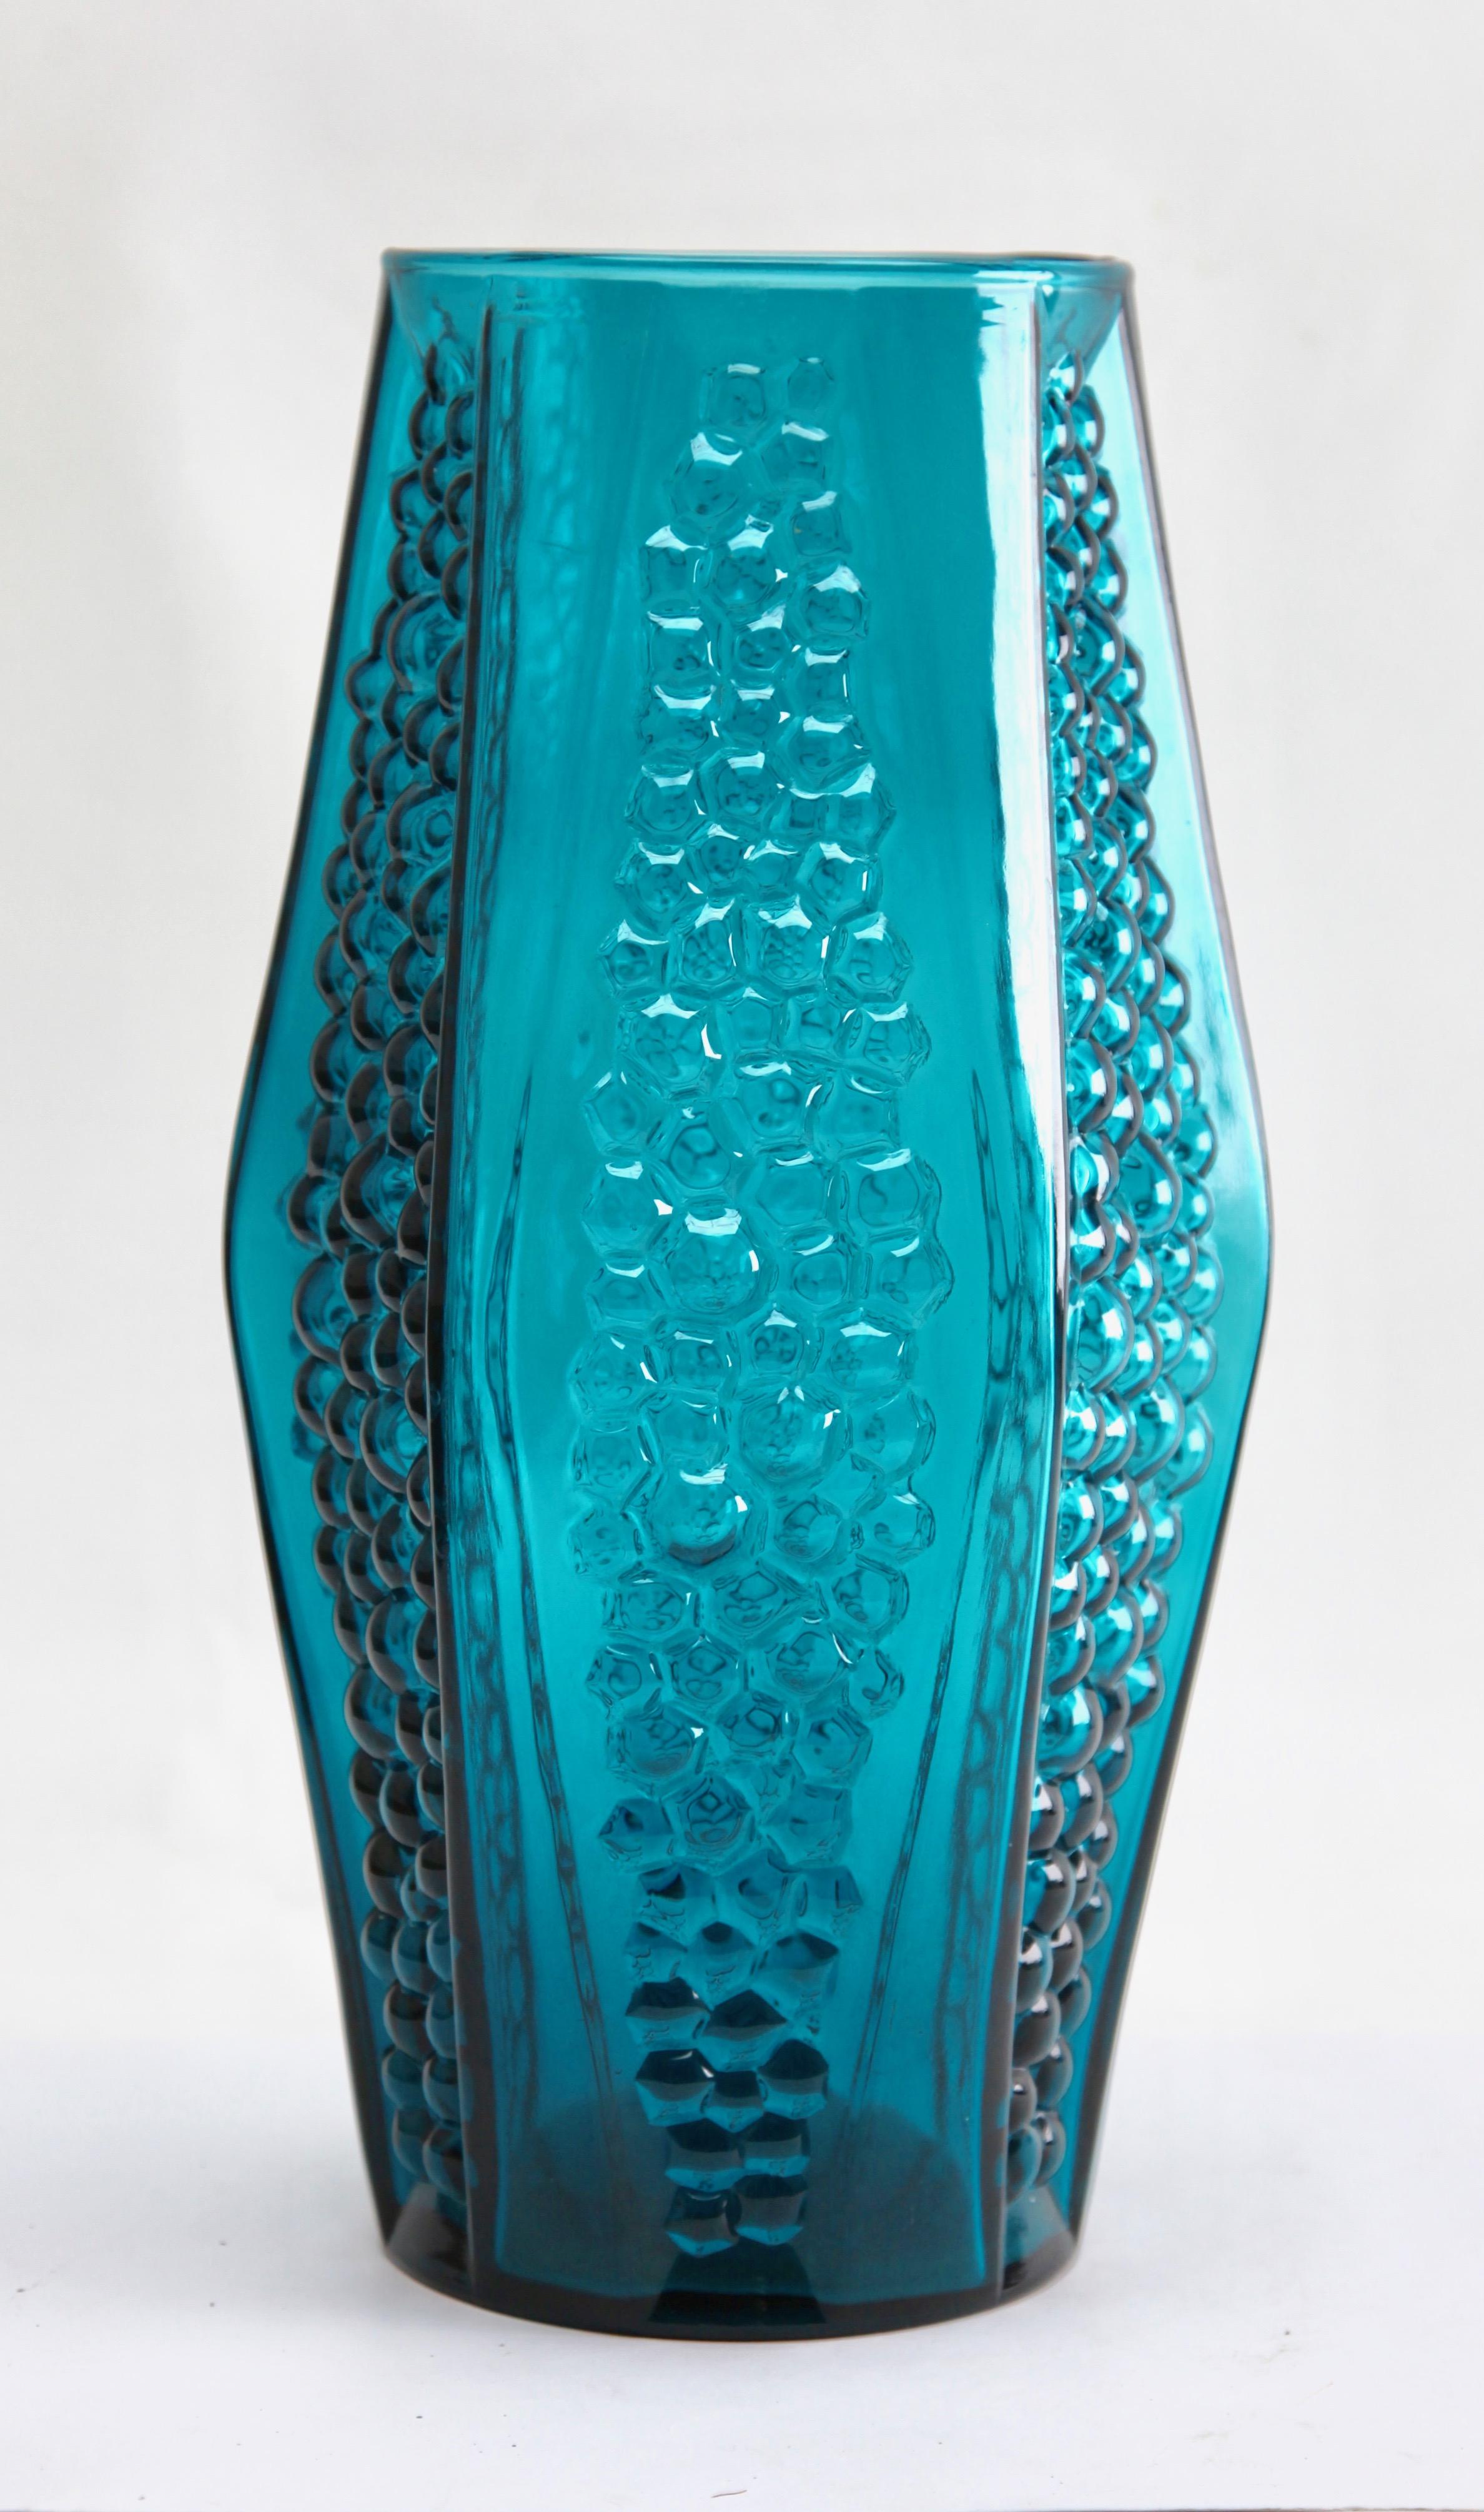 A molded hexagonal vase in sea blue with an eye-catching pattern of bubbles concave indentations. Attributed to the Stolle-Nieman factory (Huty Szklane Niemen, Poland) and made in the 1970s.
While similar designs from Czechoslovakia were made from